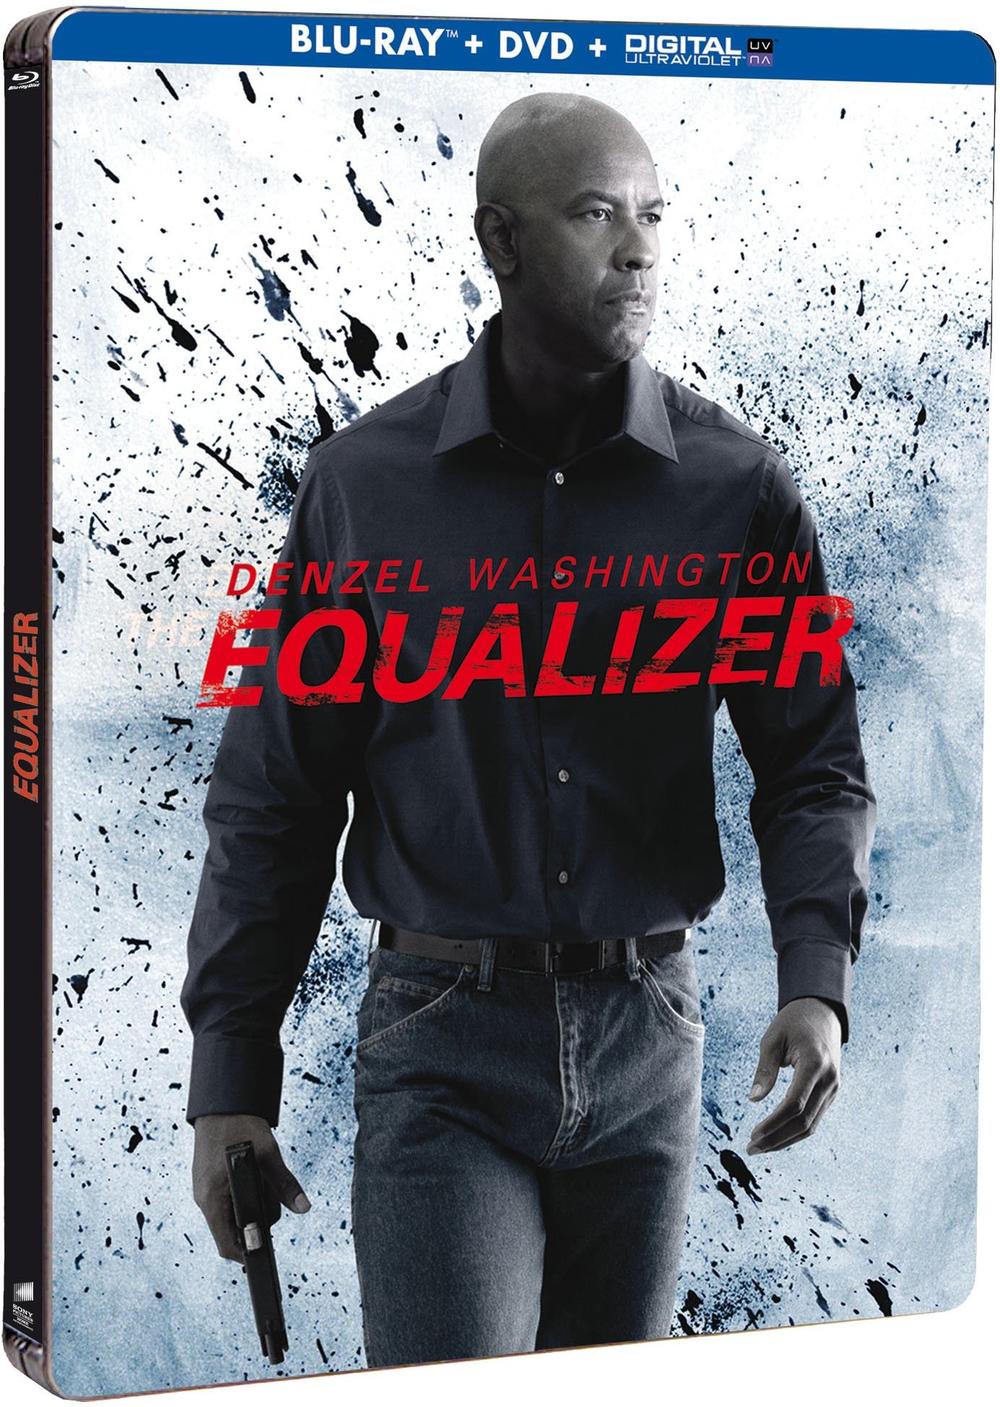 THE EQUALIZER - DVD + blu-ray